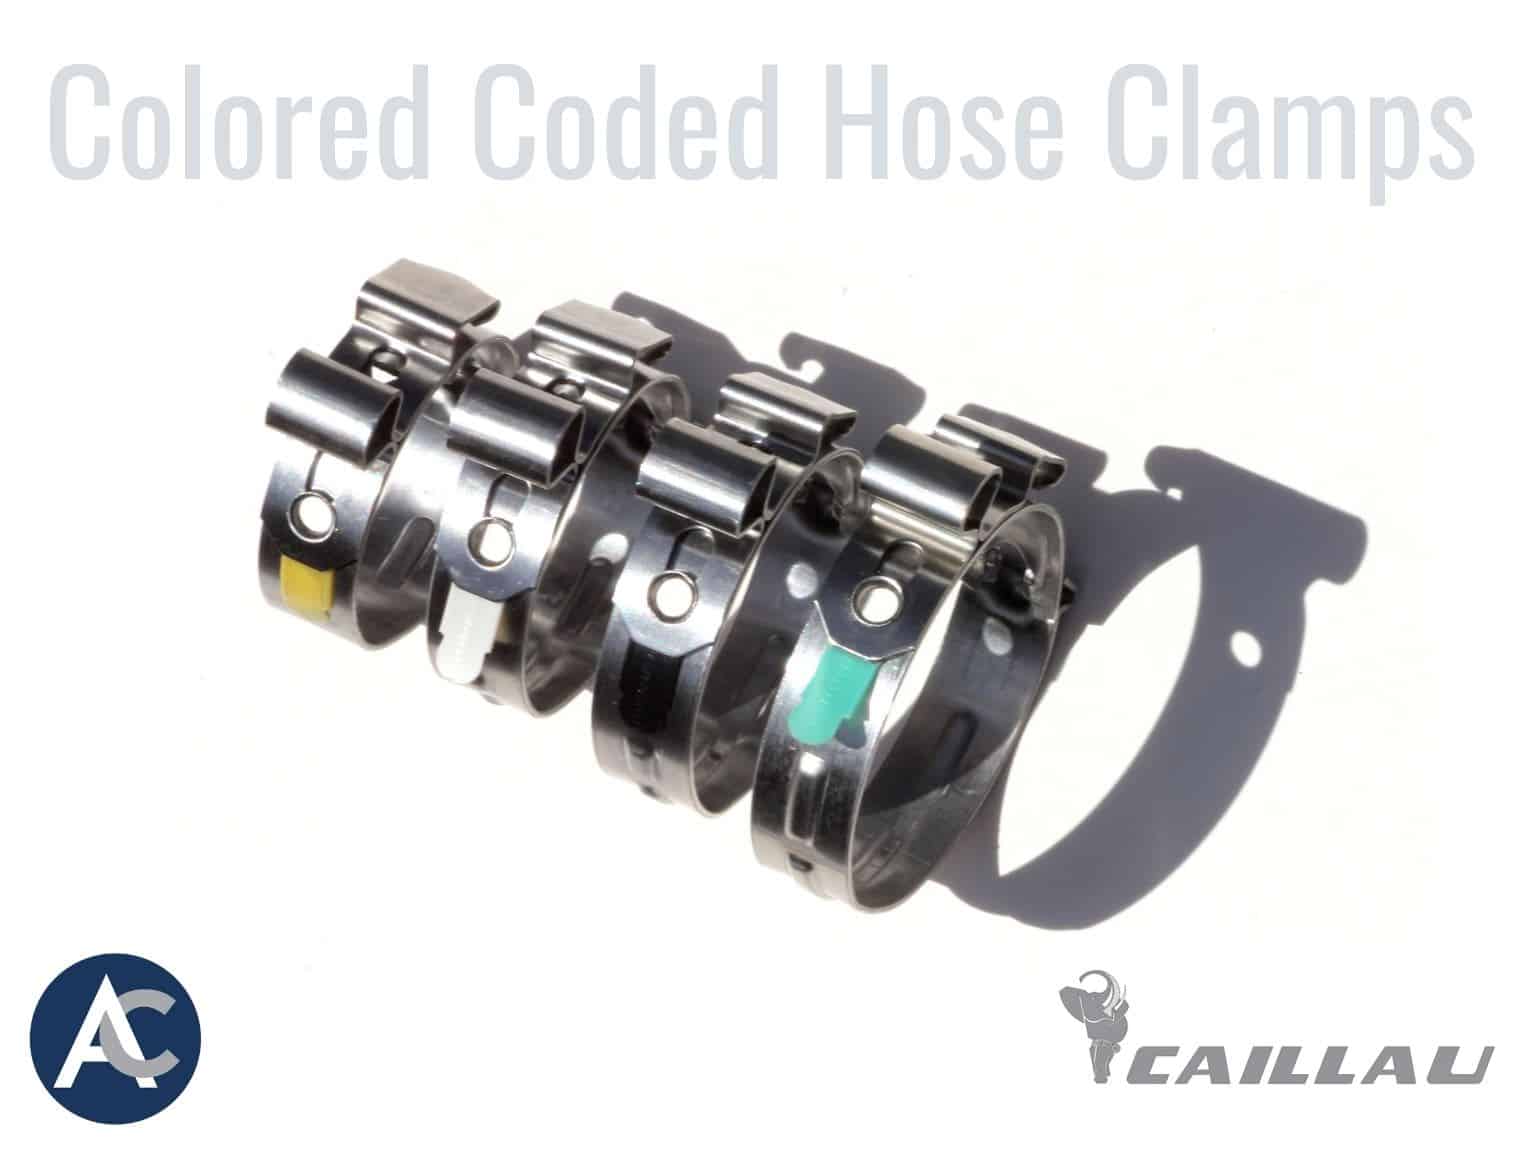 Color-Coded Hose Clamps, Caillau CLIC hose clamps, hose clamps